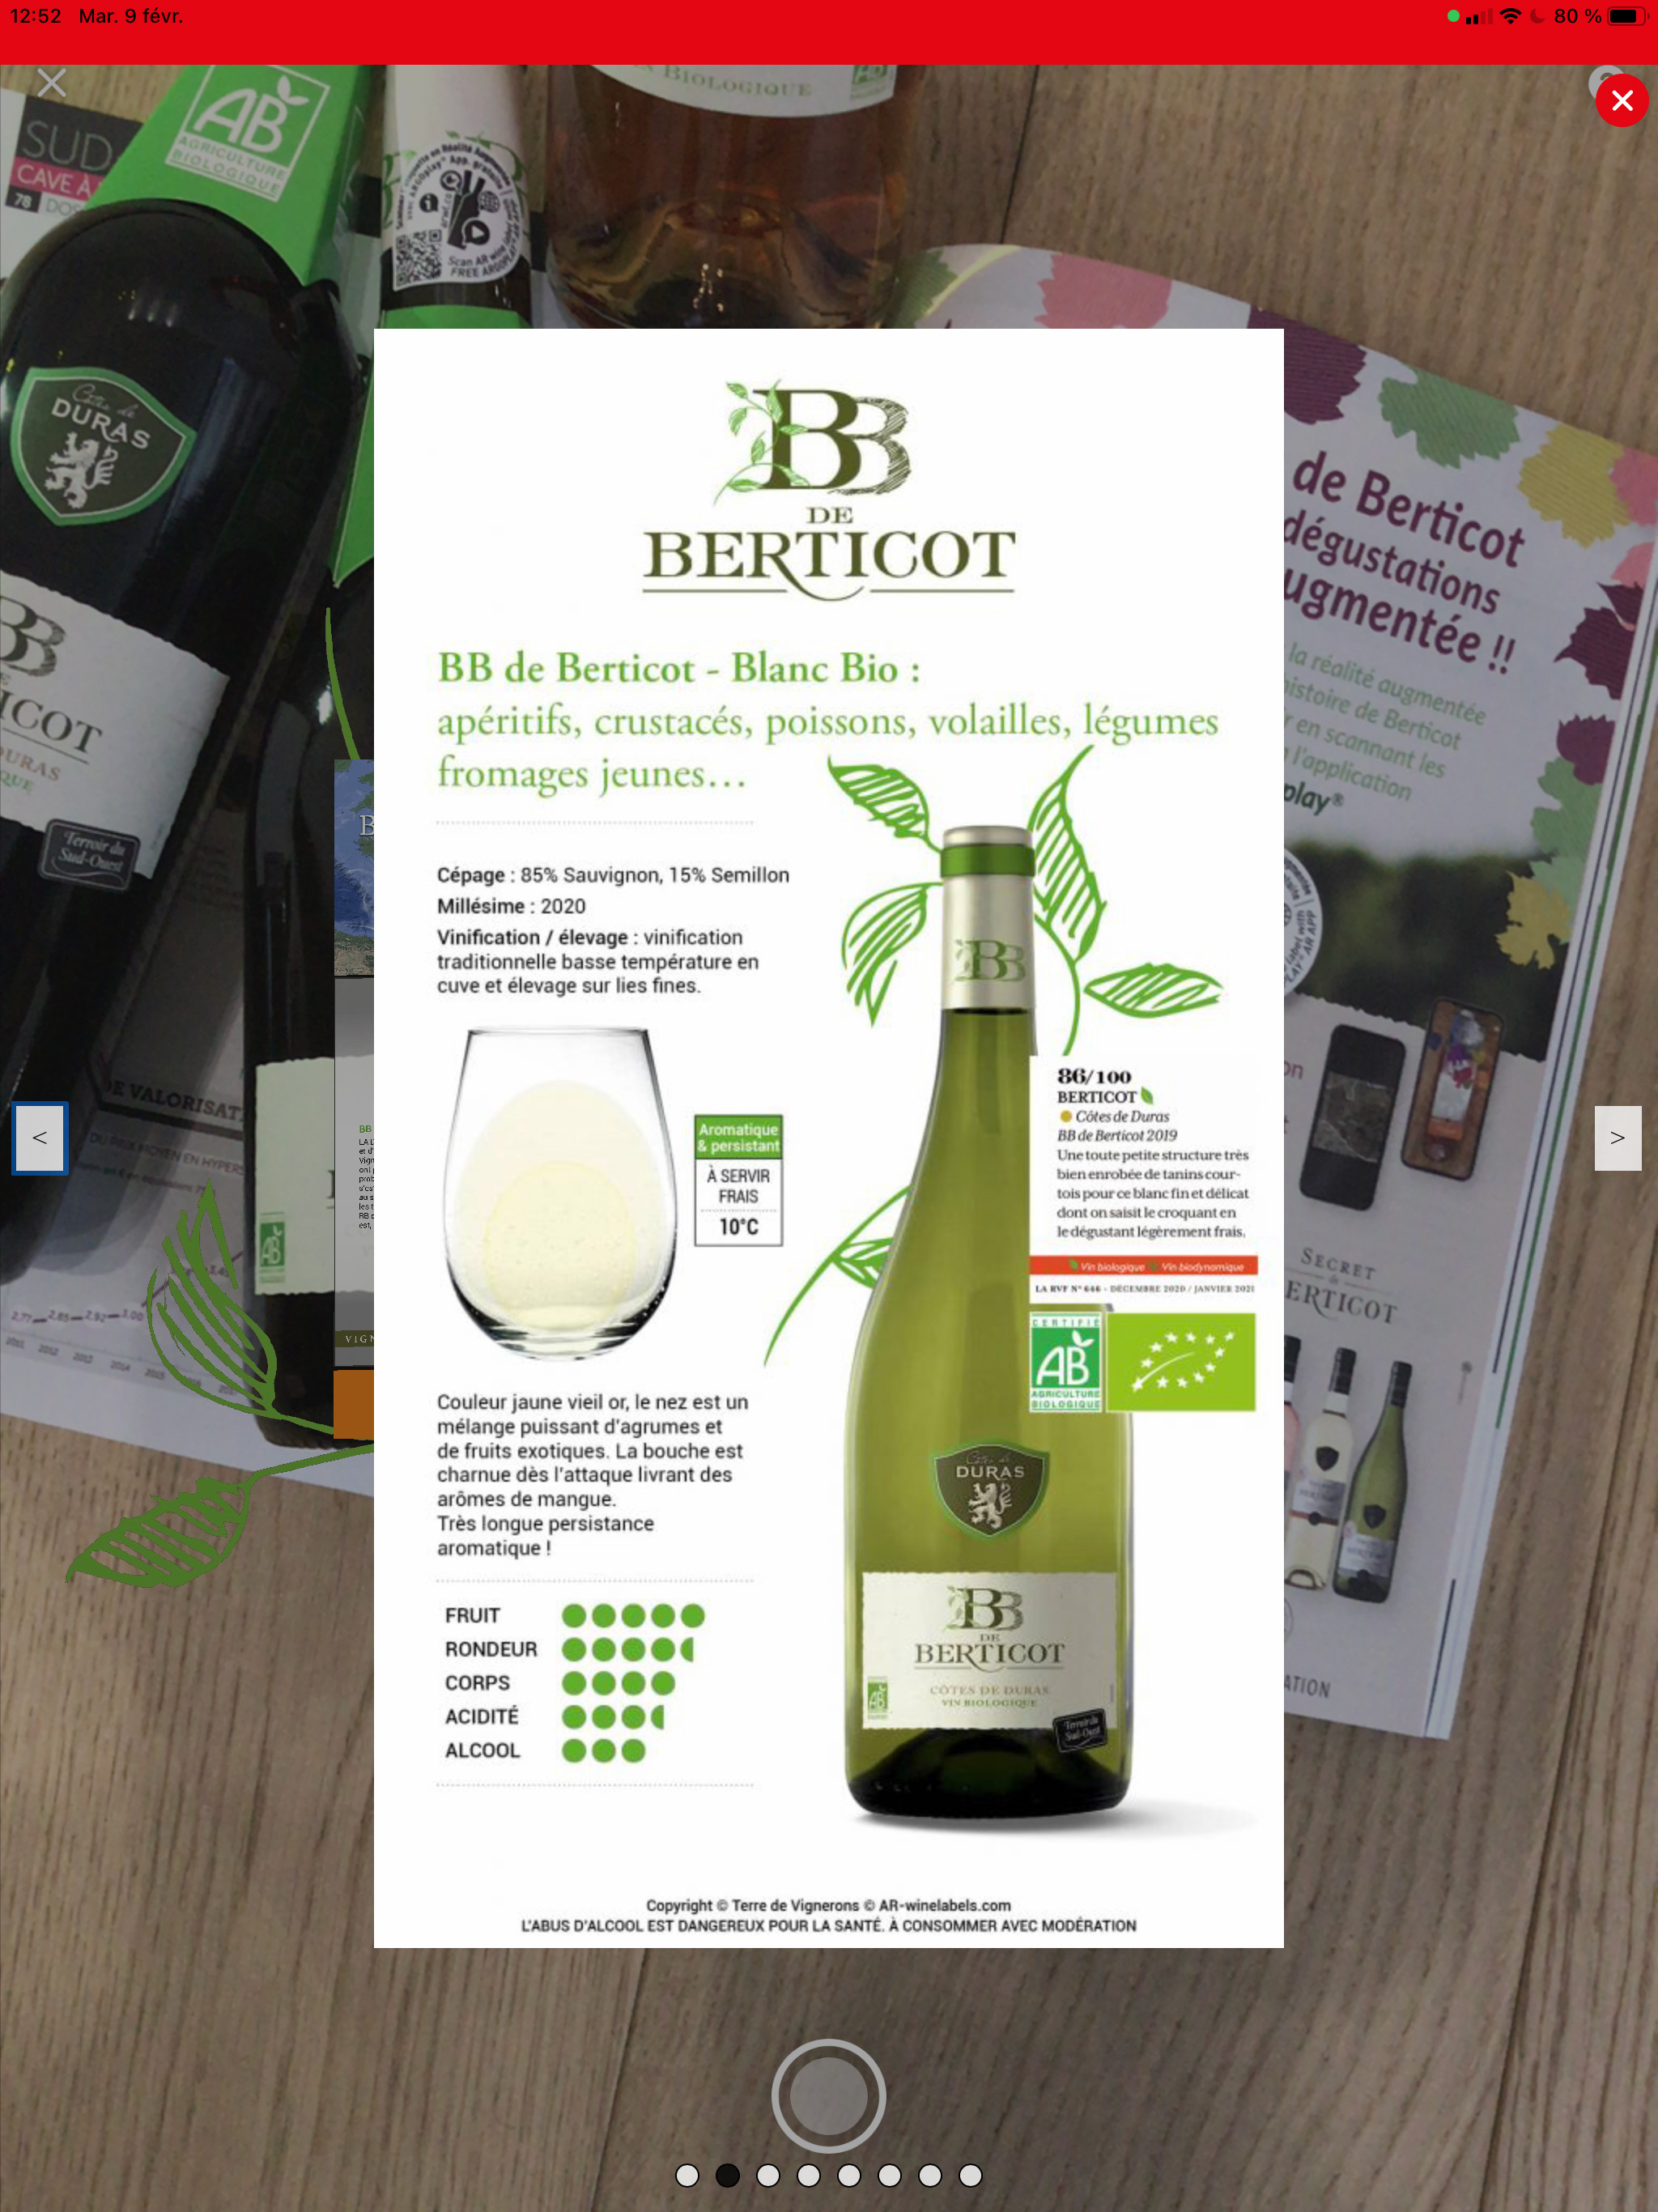 Berticot Bio Blanc label and Revue du Vin de France rating in Augmented Reality